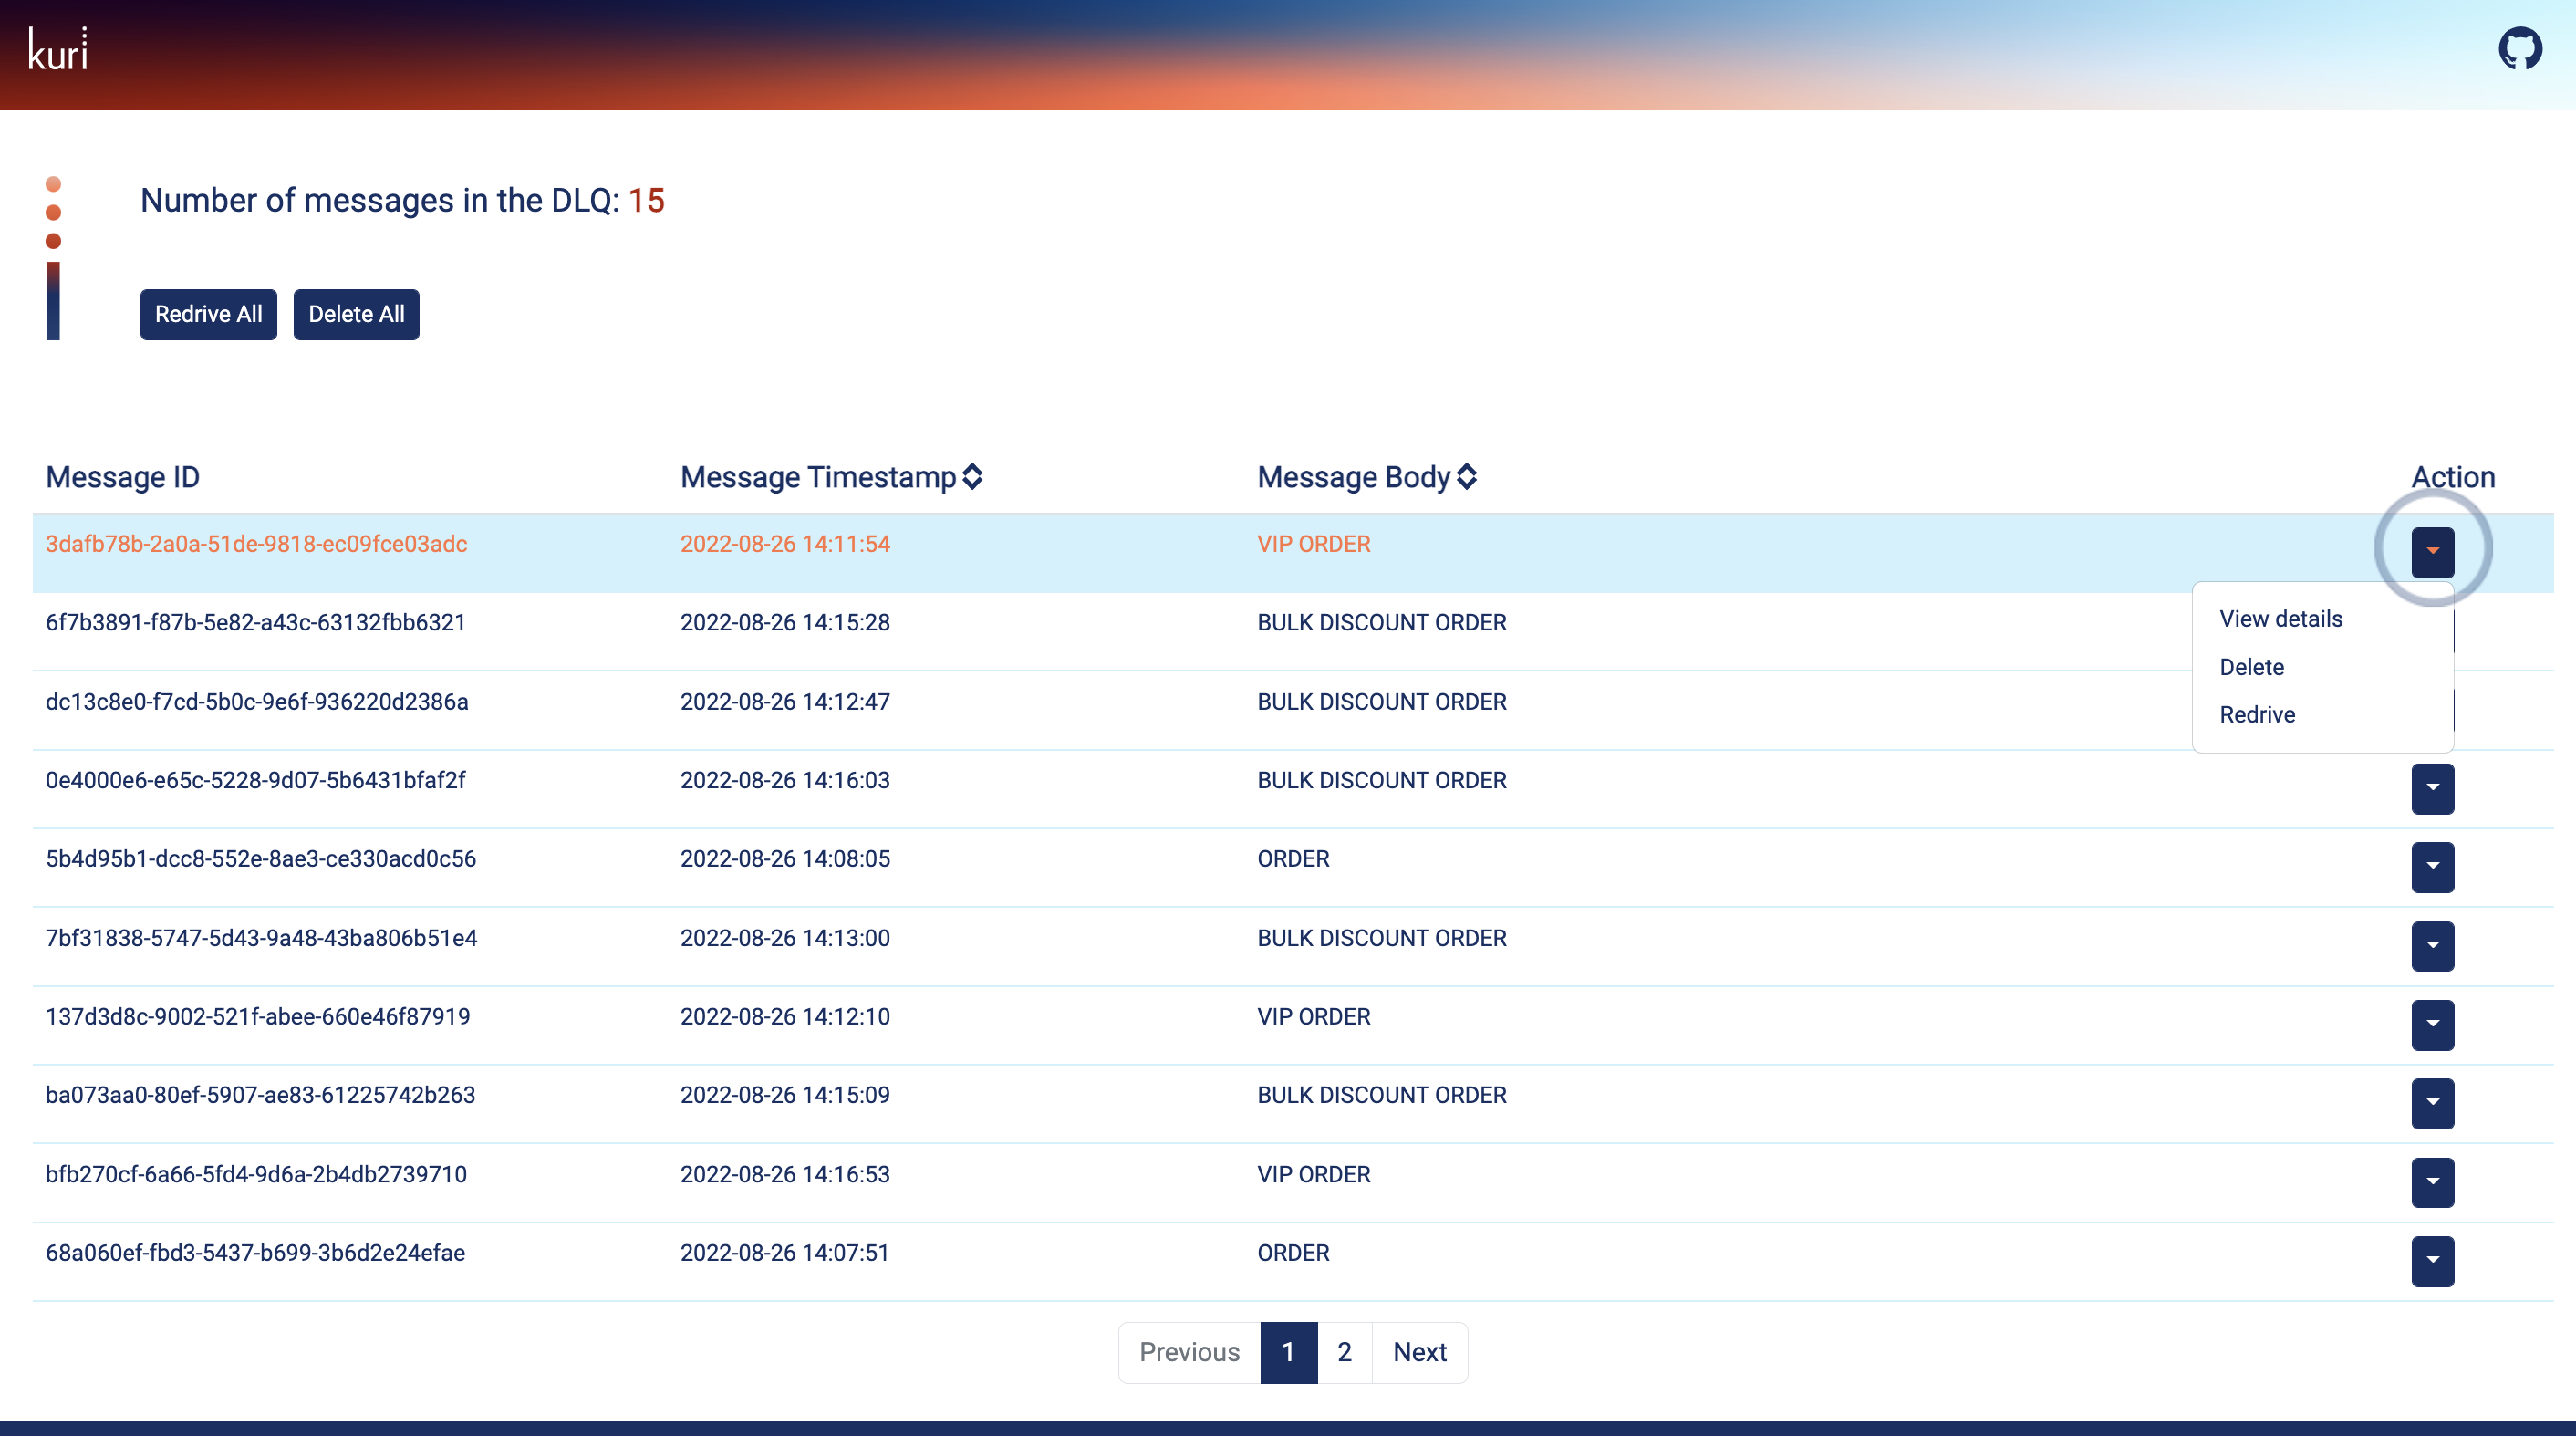 The Kuri dashboard action dropdown menu allows the user to view the details of a message, delete a message or redrive it back to the main queue.